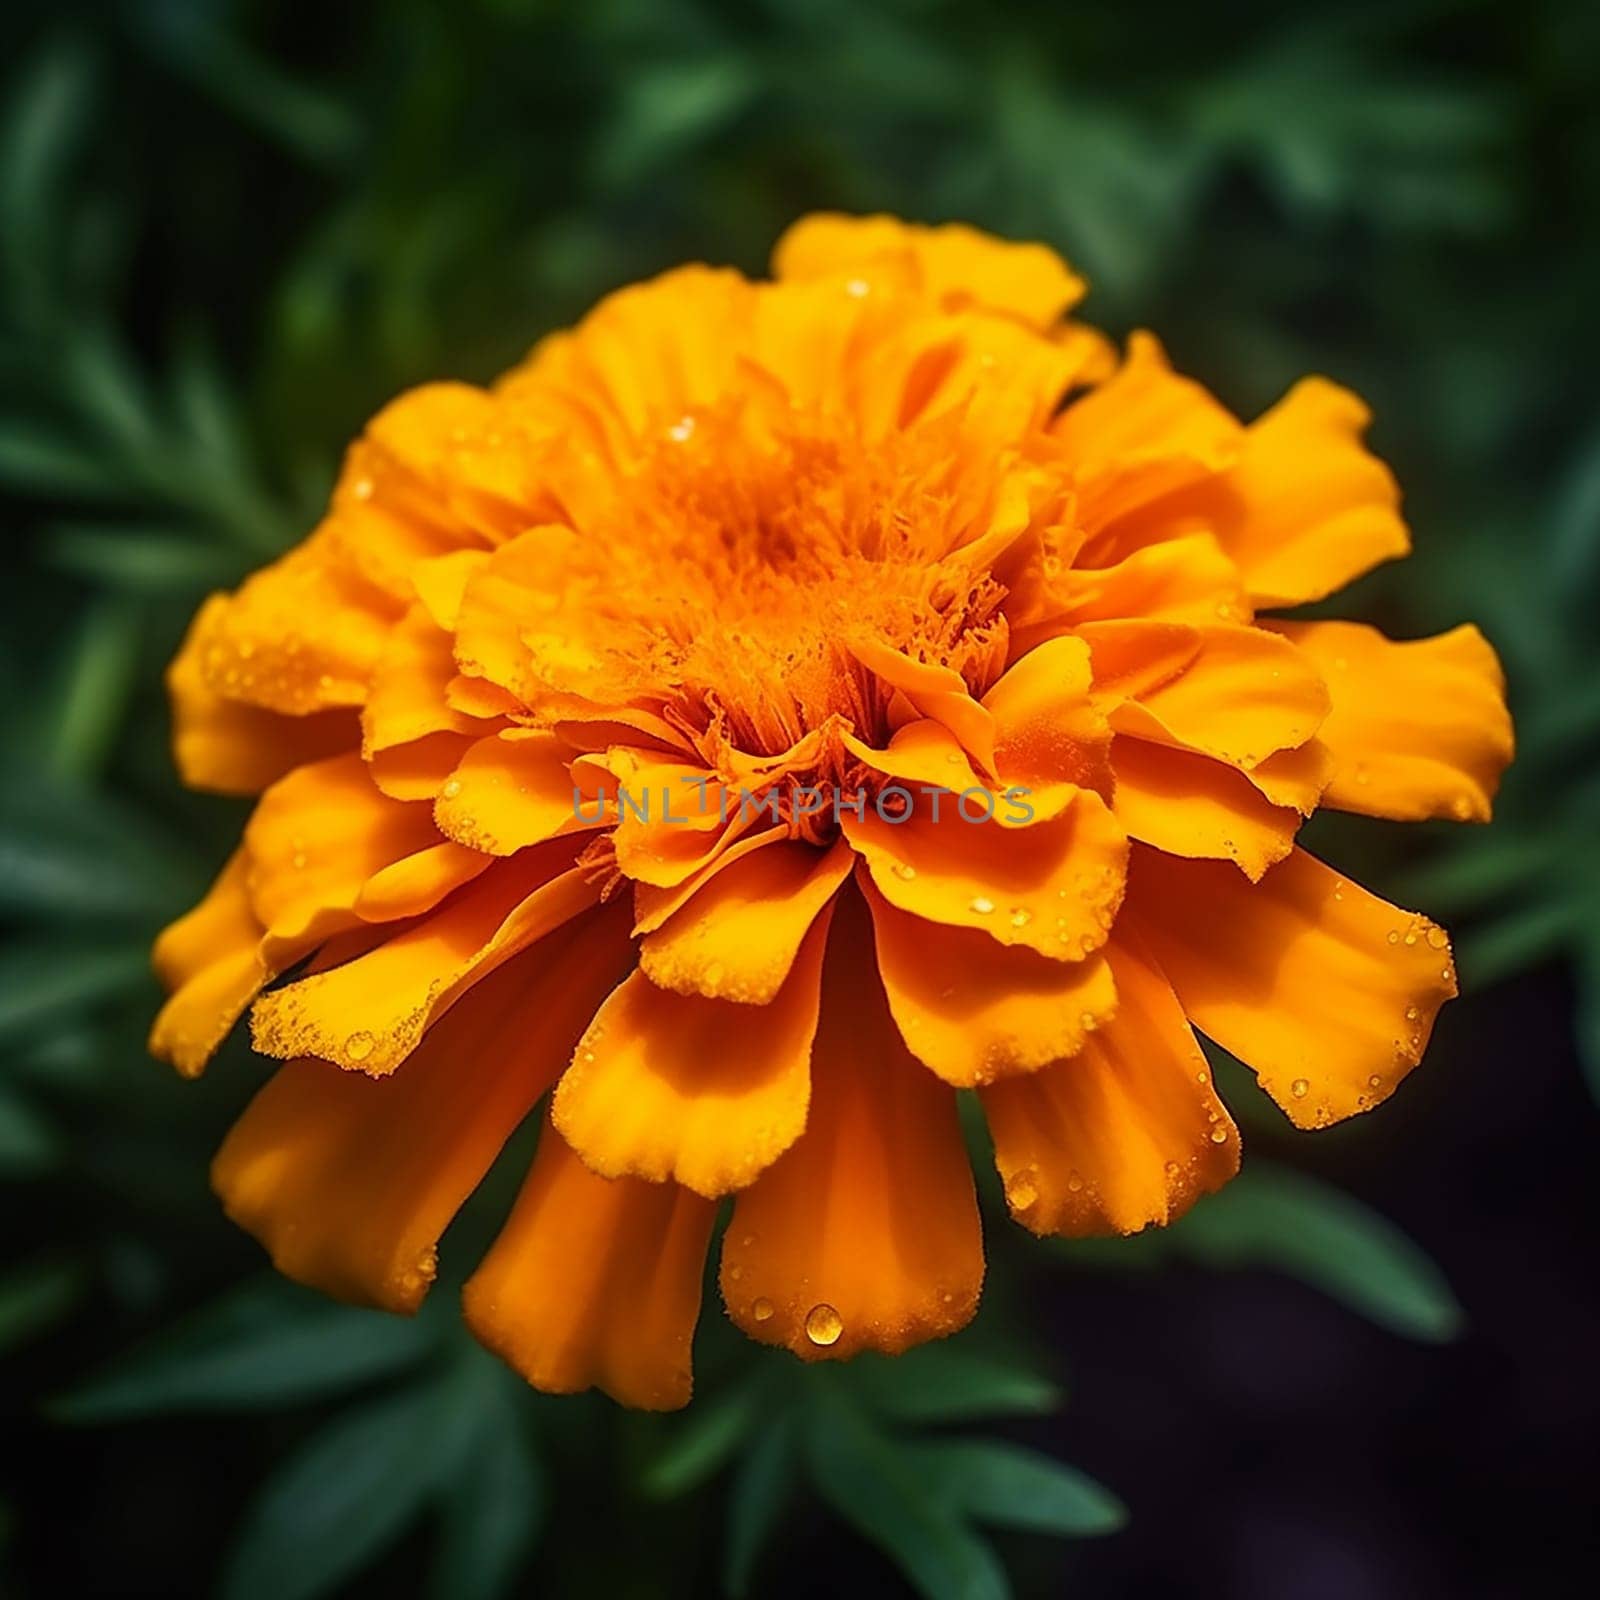 Close-up of a vibrant orange marigold with water droplets against a dark background.